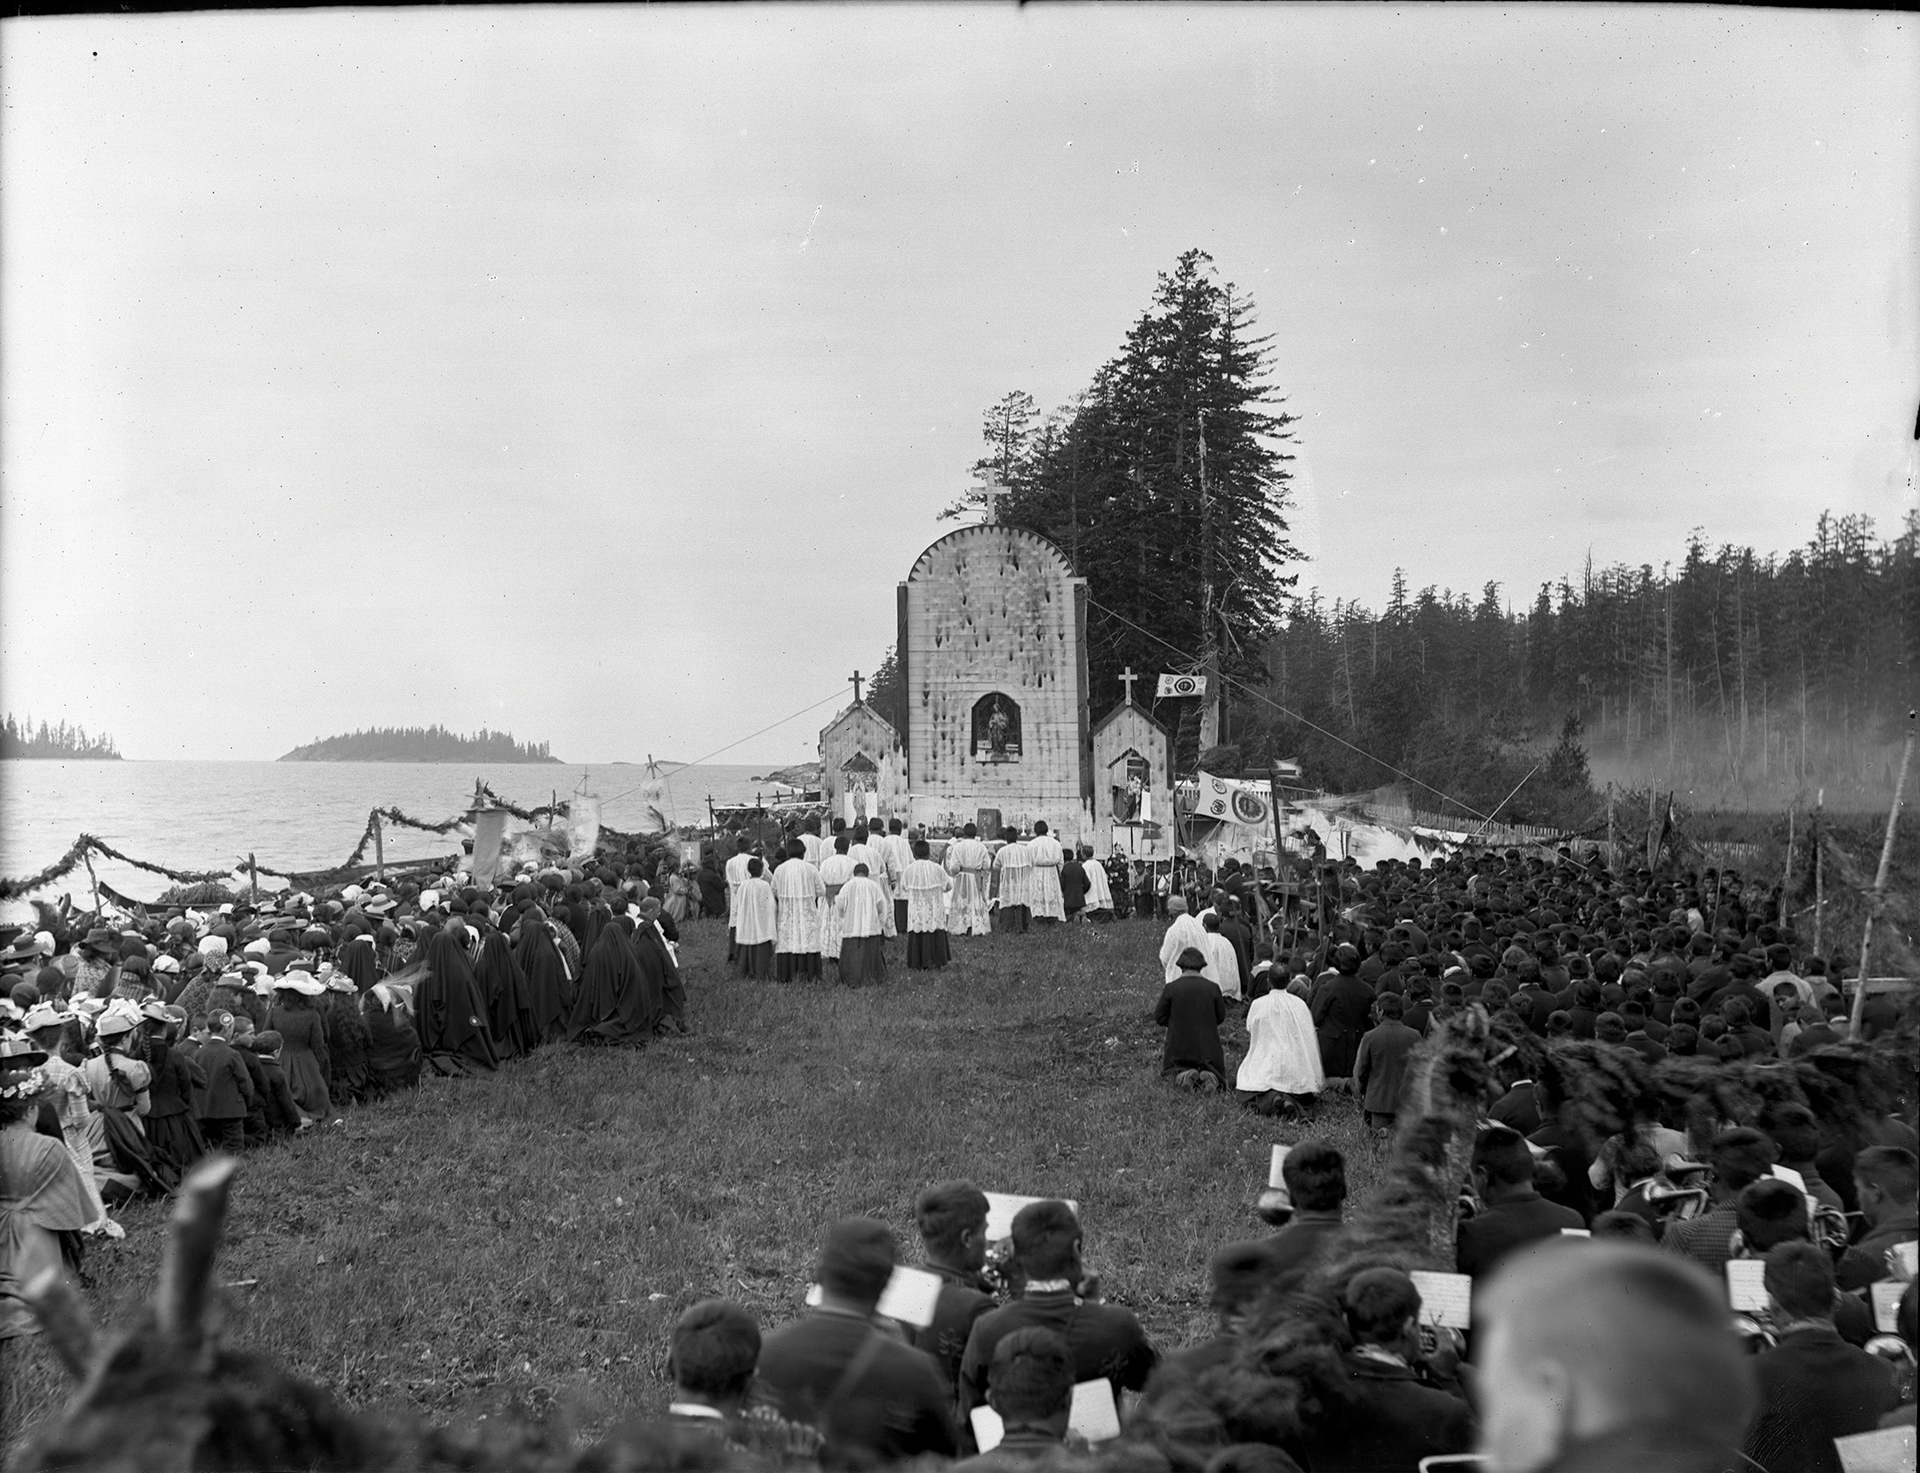 web-first-nations-people-at-worship-in-sechelt-vpl-19923_554